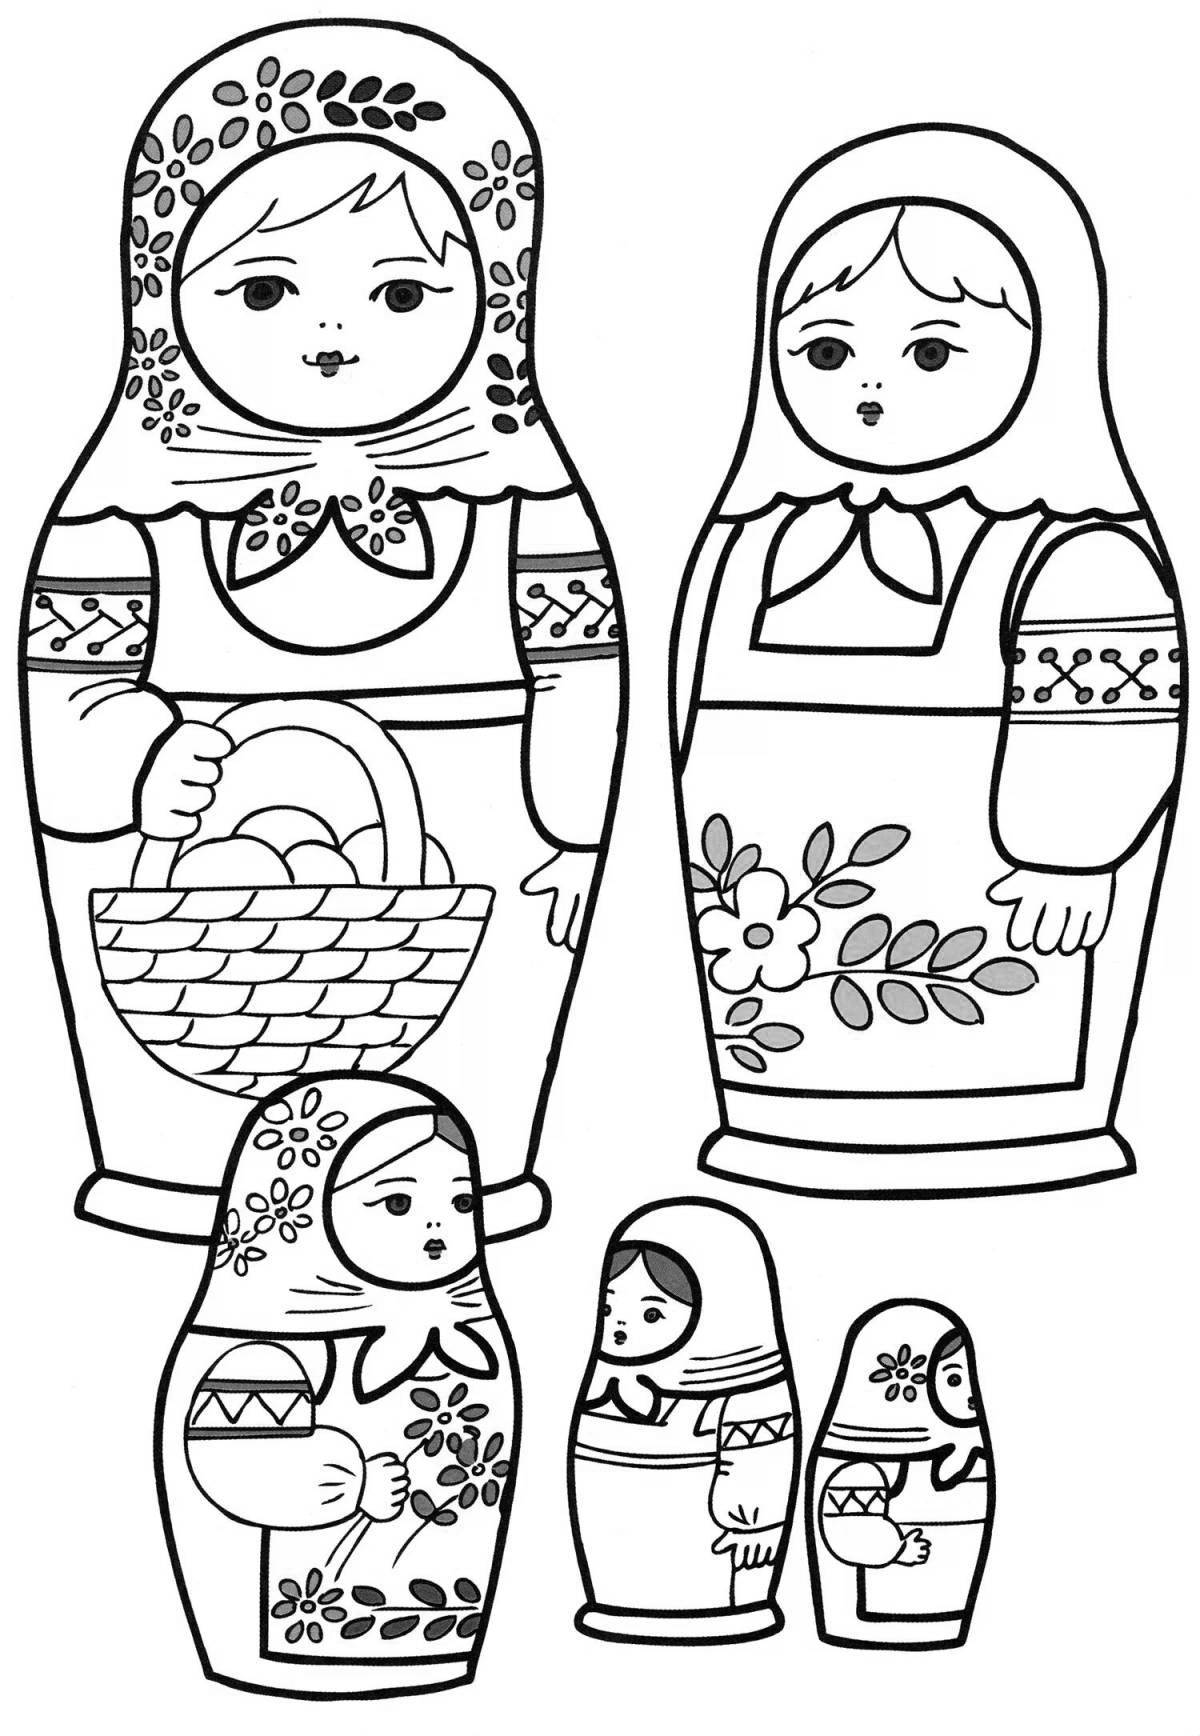 Coloring page elegant russian doll